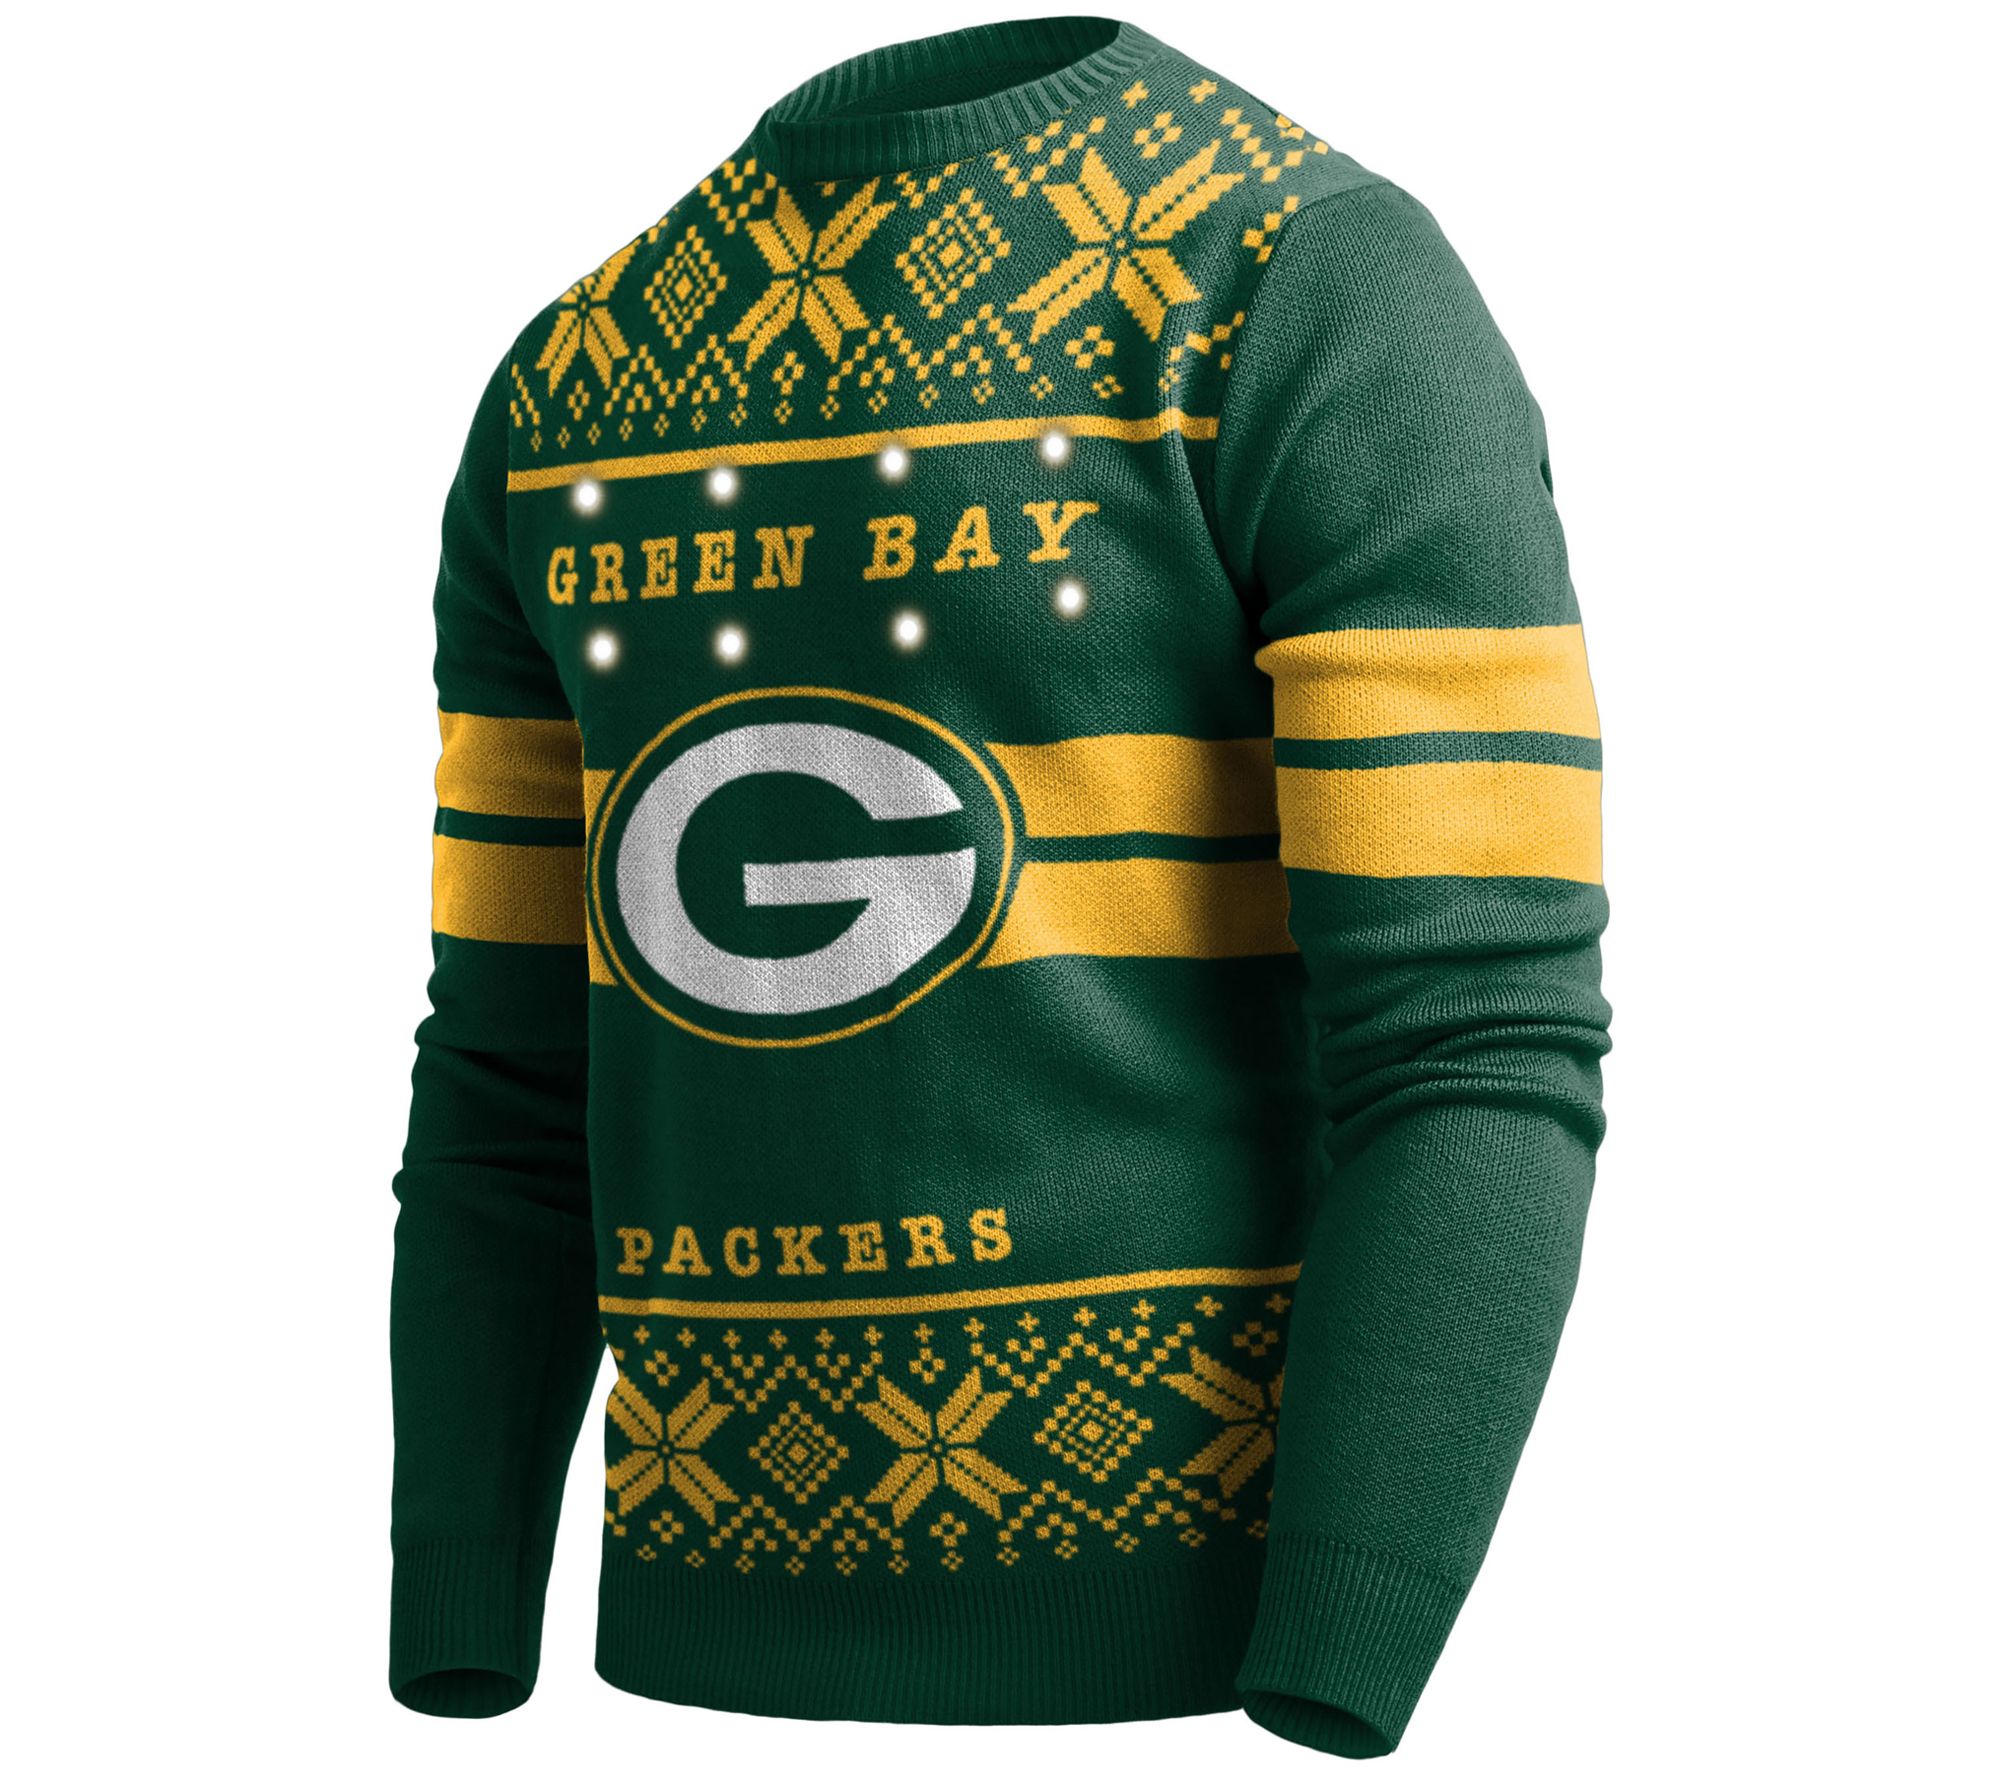 As Is' NFL LED Lighted Ugly Sweater 